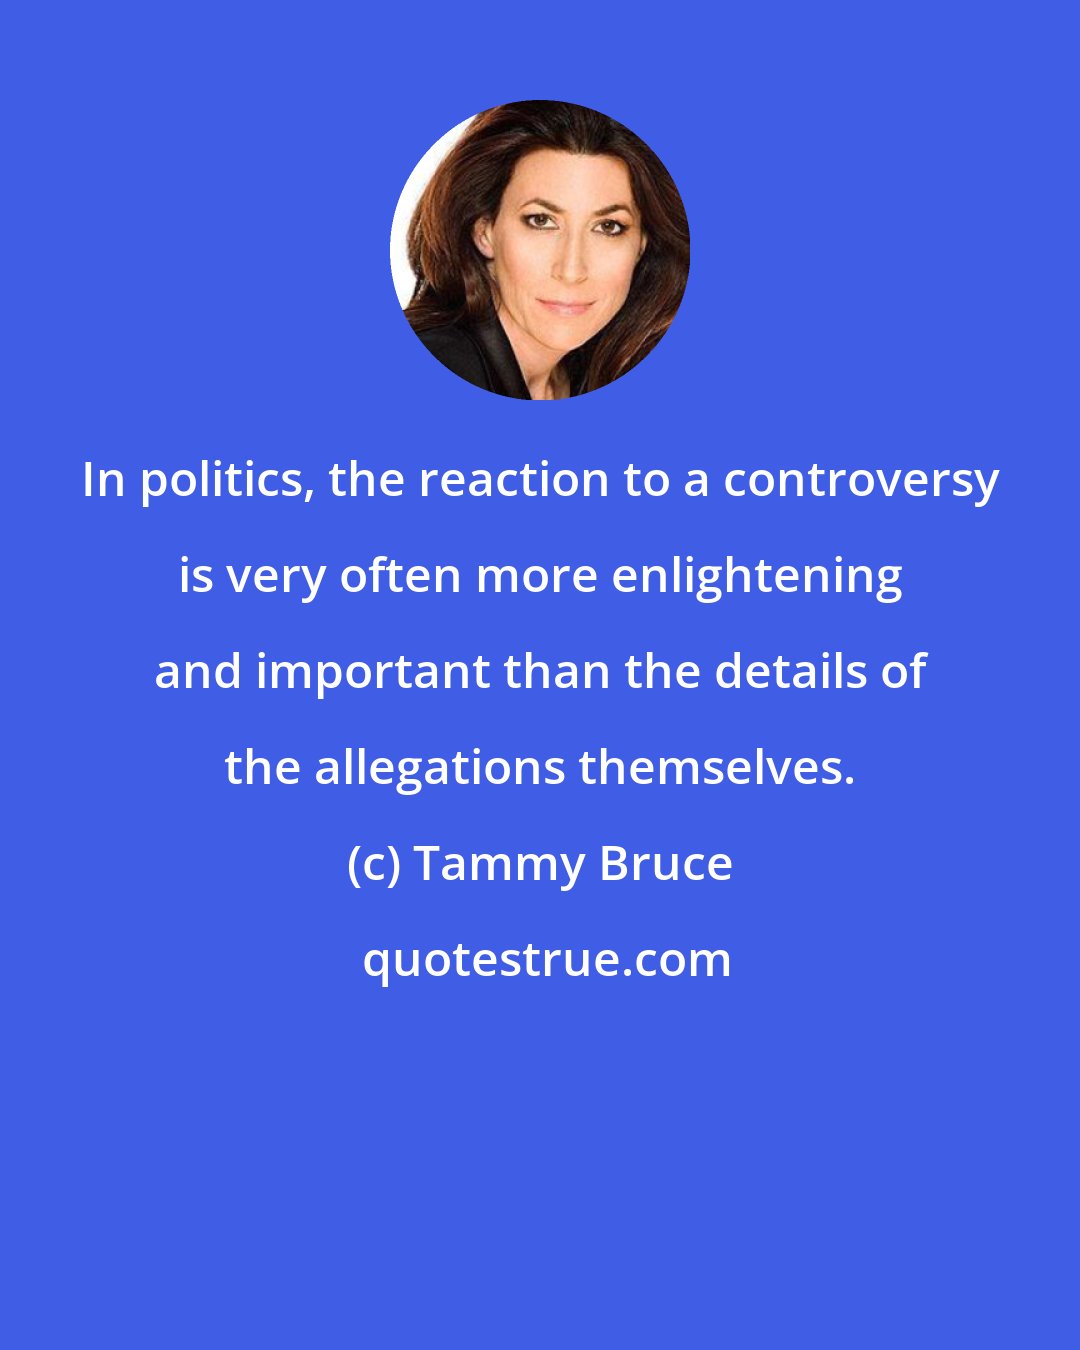 Tammy Bruce: In politics, the reaction to a controversy is very often more enlightening and important than the details of the allegations themselves.